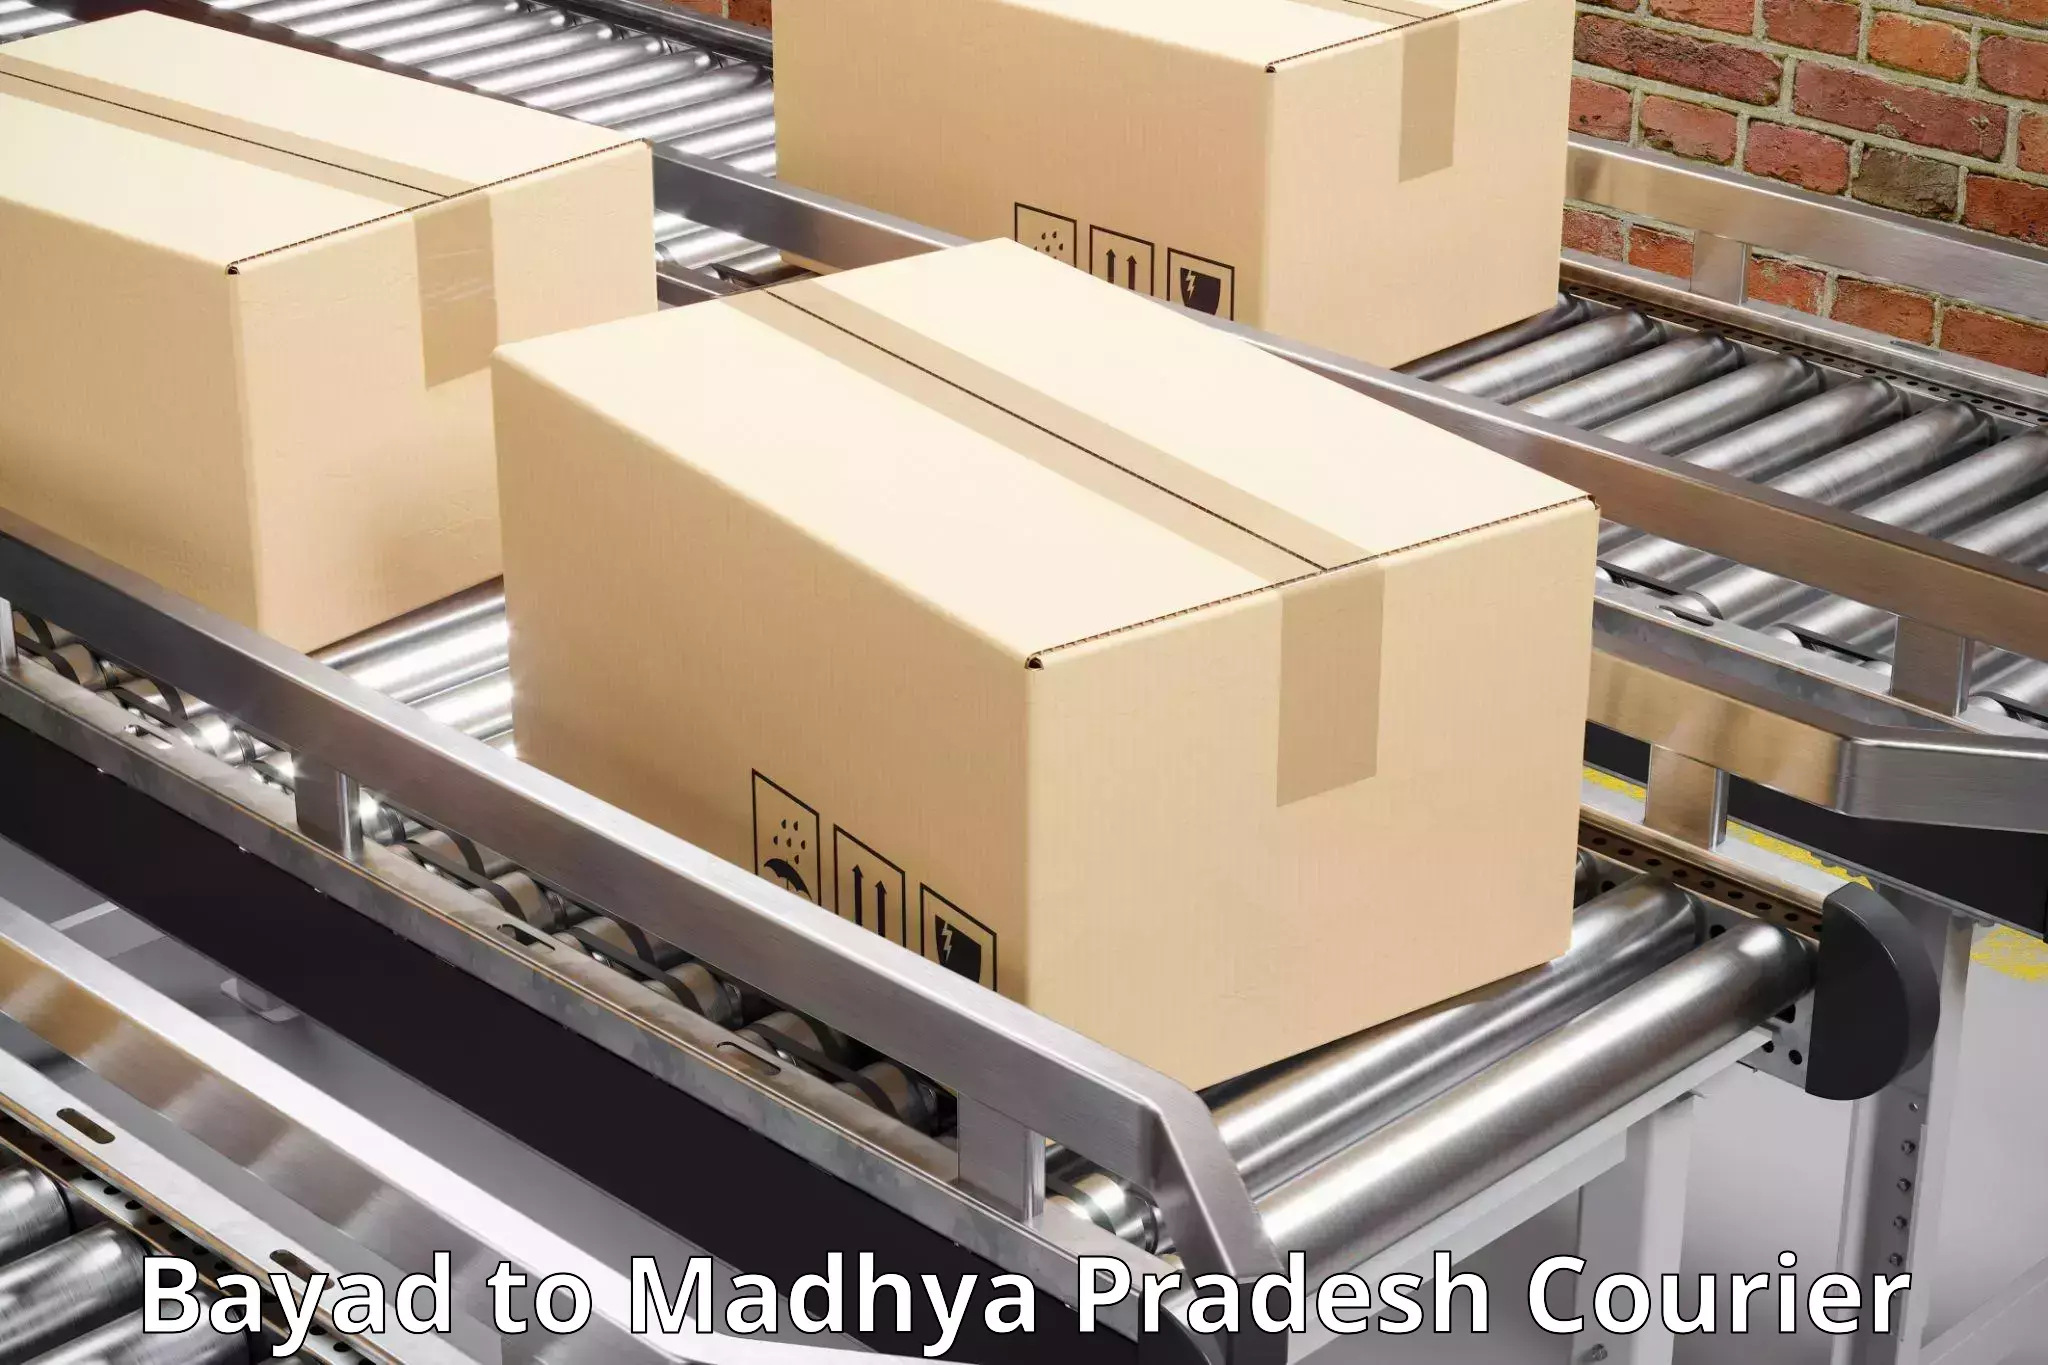 High-speed parcel service Bayad to Deosar